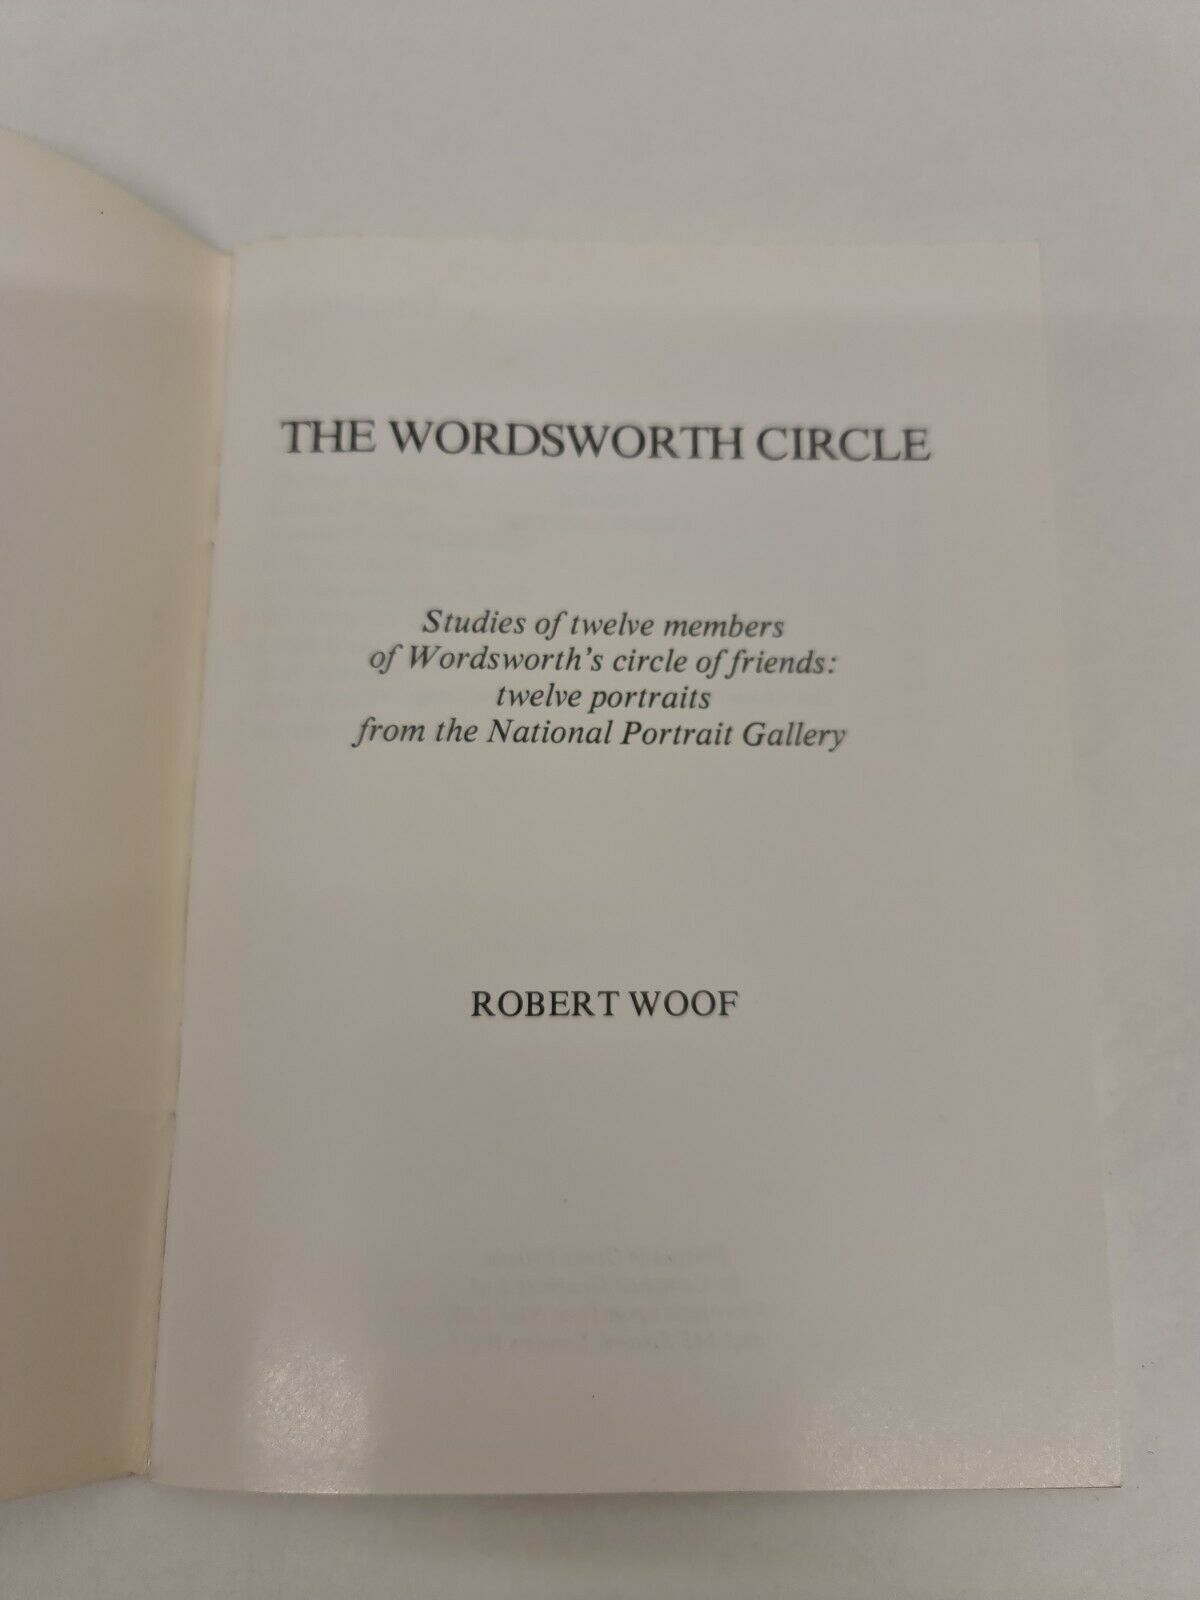 The Wordsworth Circle by Robert Woof